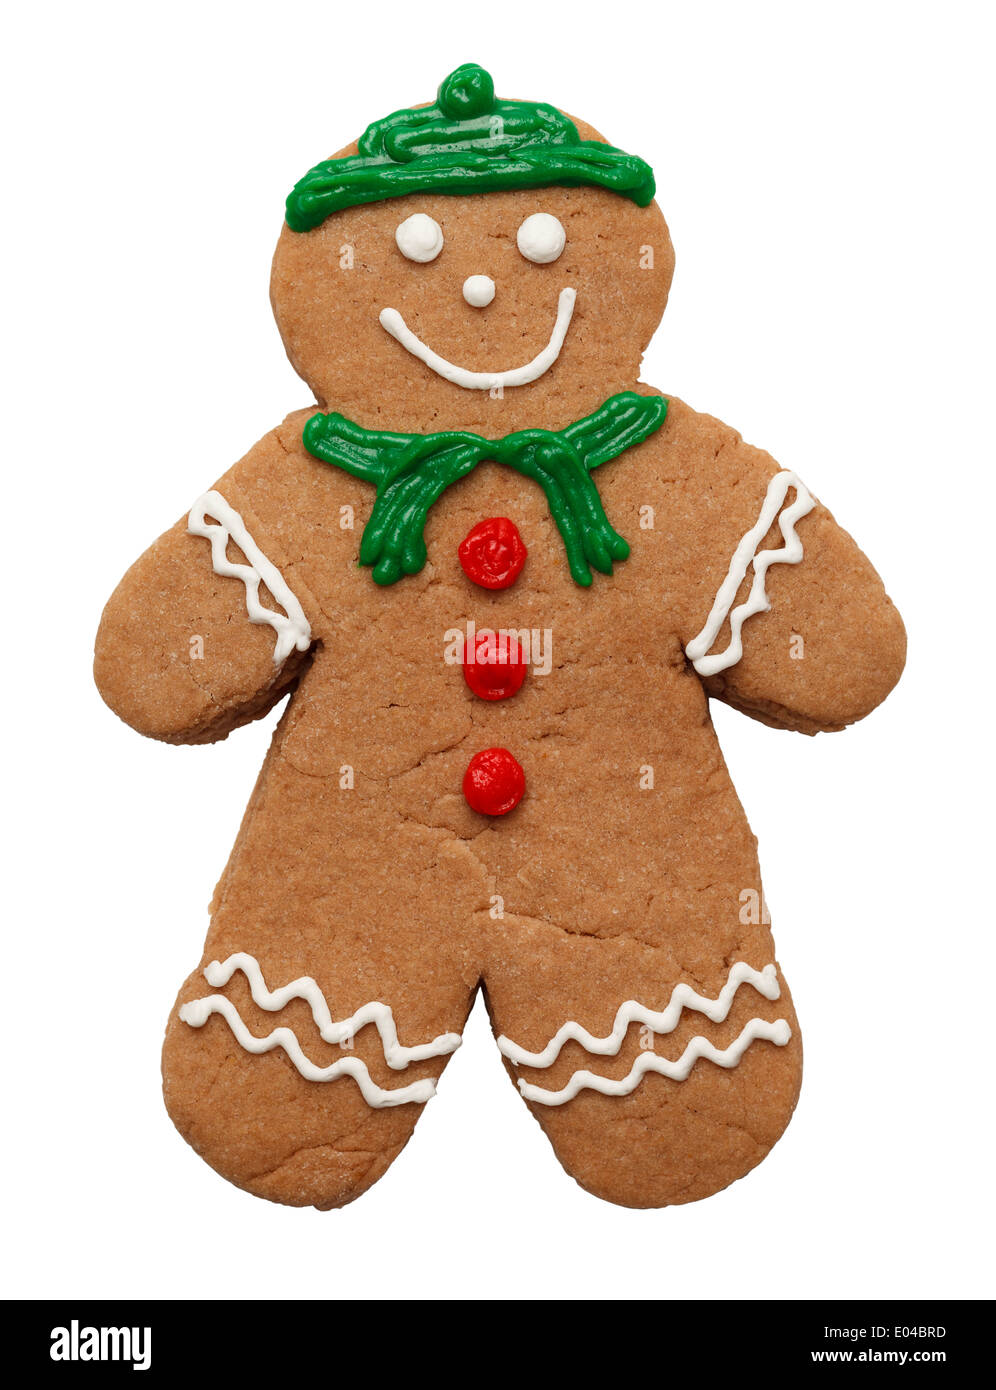 Gingerbread Cookie With Winter Christmas Descoration Isolated on White Background. Stock Photo